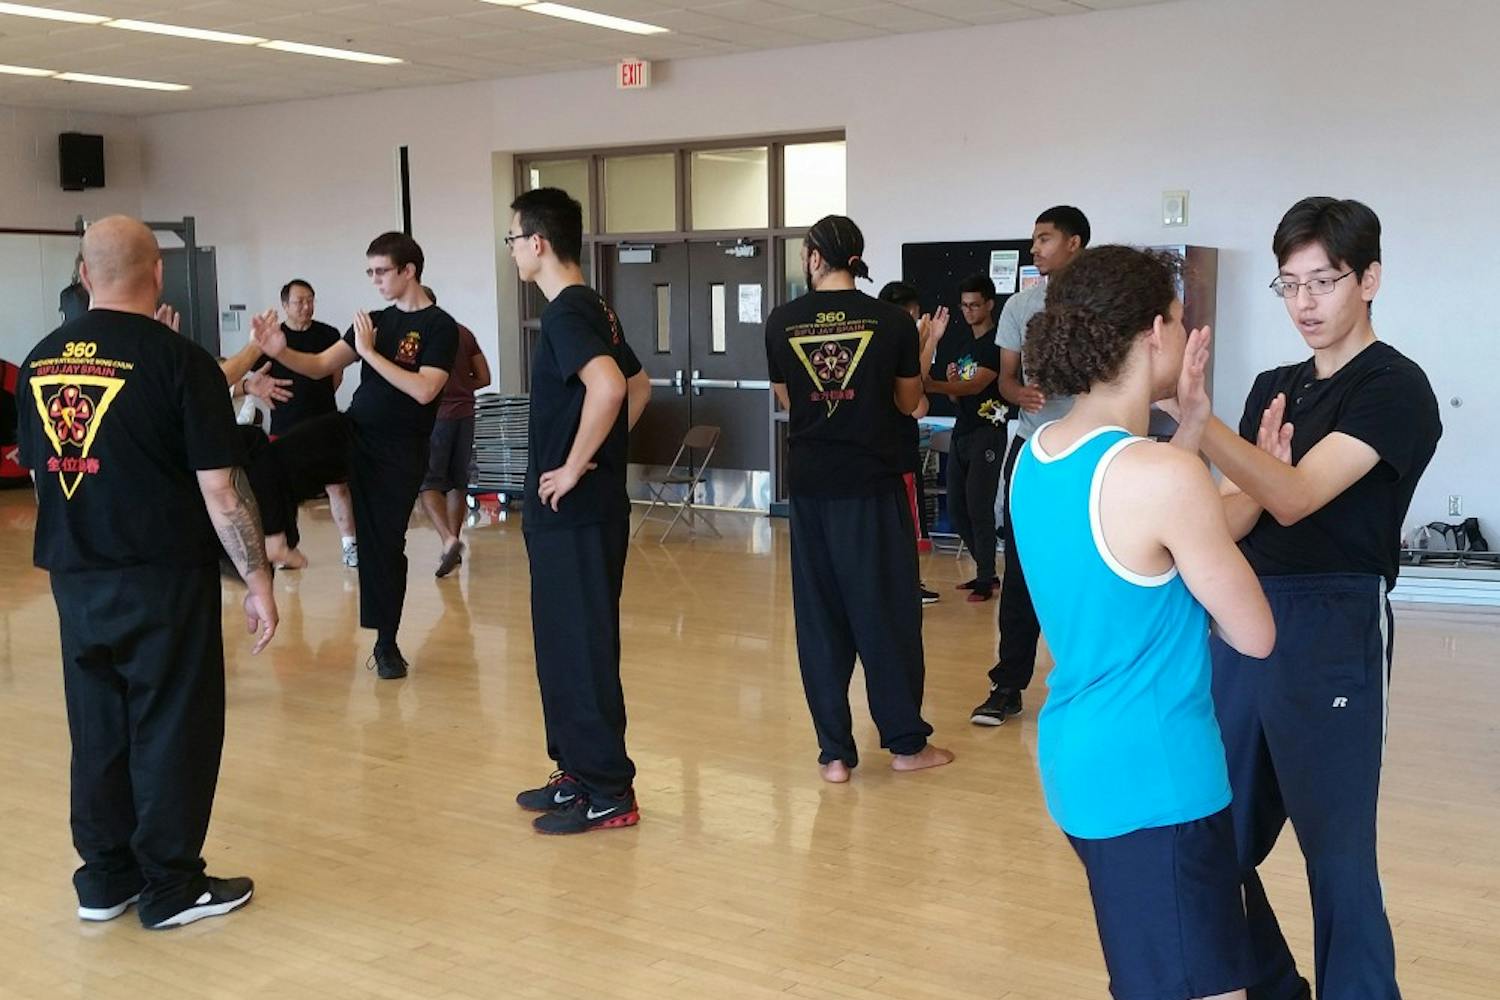 Students practice one-on-one combat in a Wing Chun class on Sunday, Nov. 6, 2016.